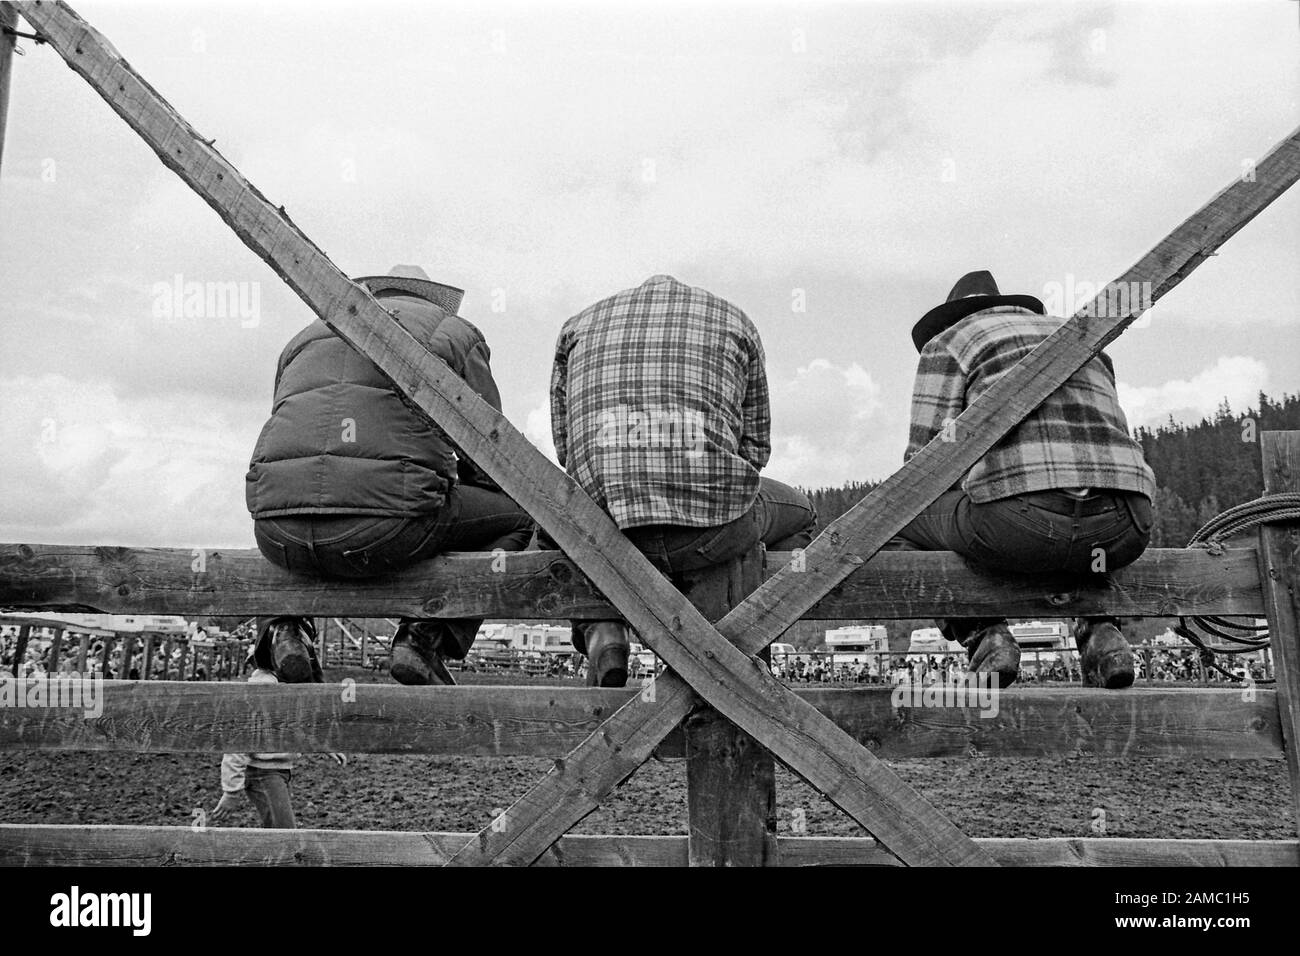 Three rodeo spectators sitting on a wooden fence in rural Canada Monochrome photograph circa 1982. Water Valley Alberta Stock Photo